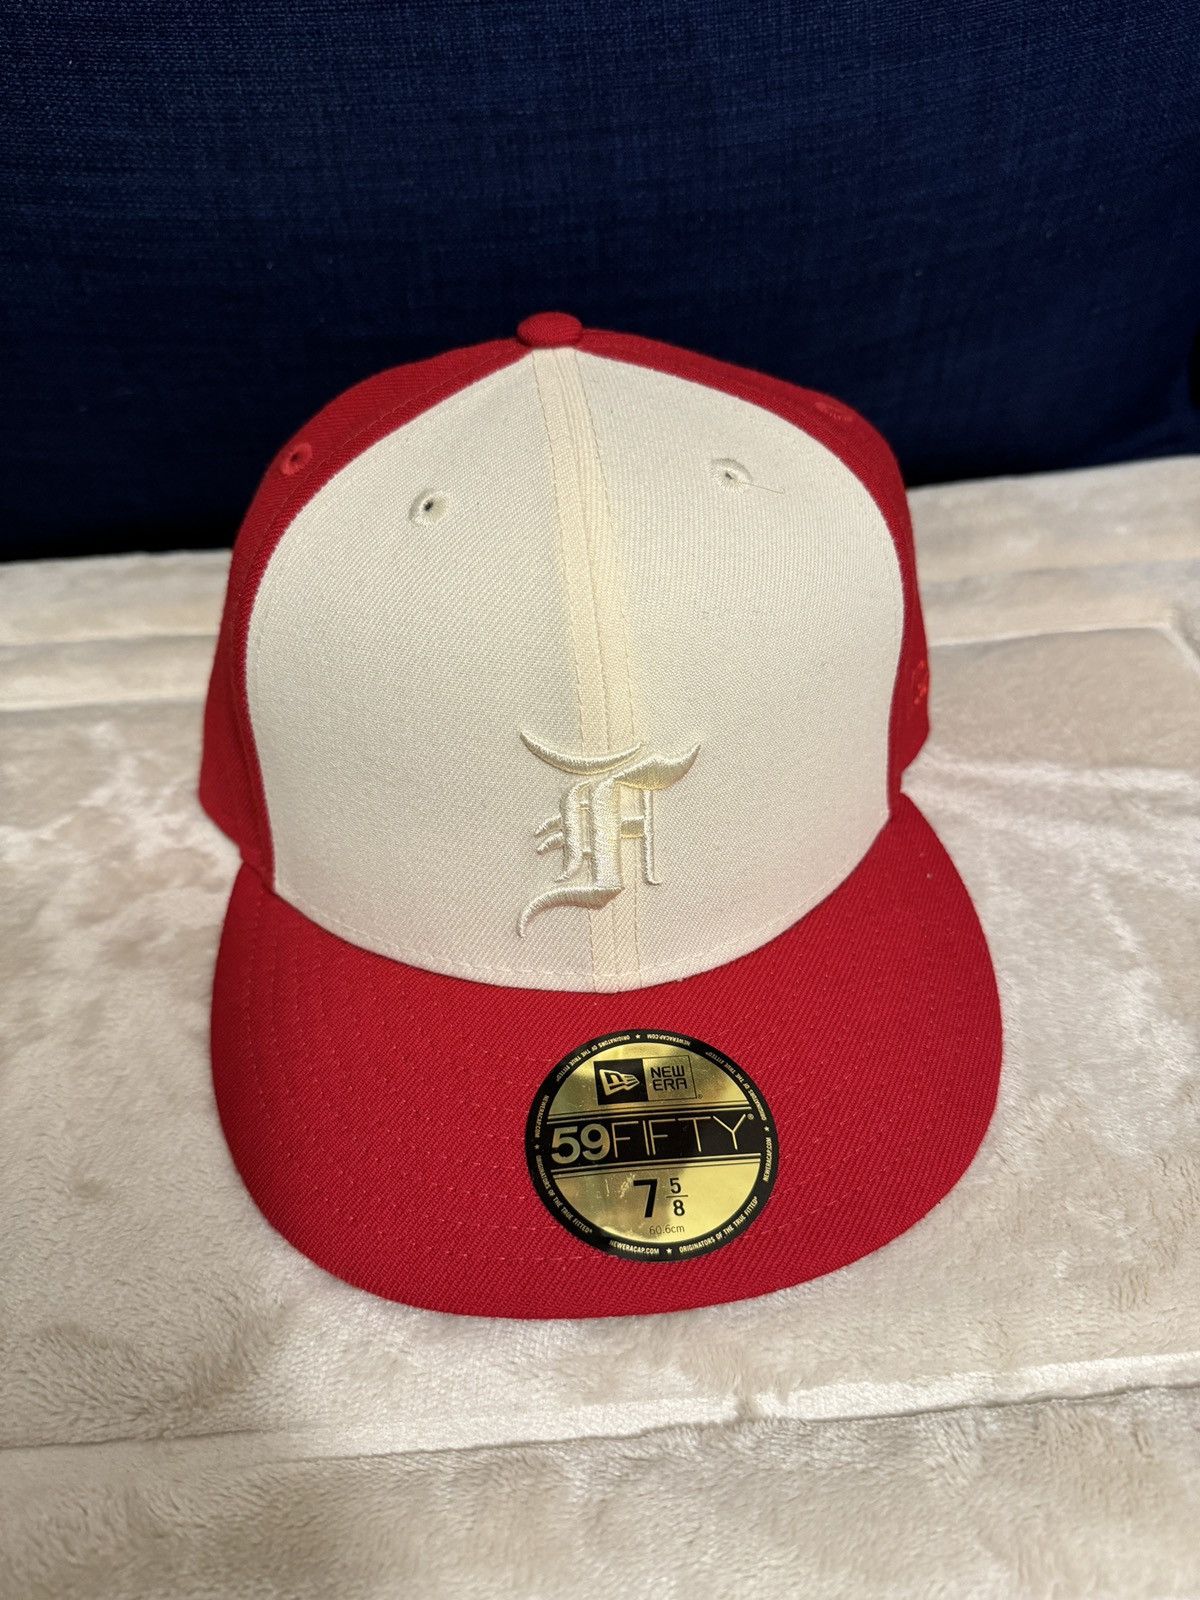 New Era Essential New Era 59fifty Fitted Hat | Grailed